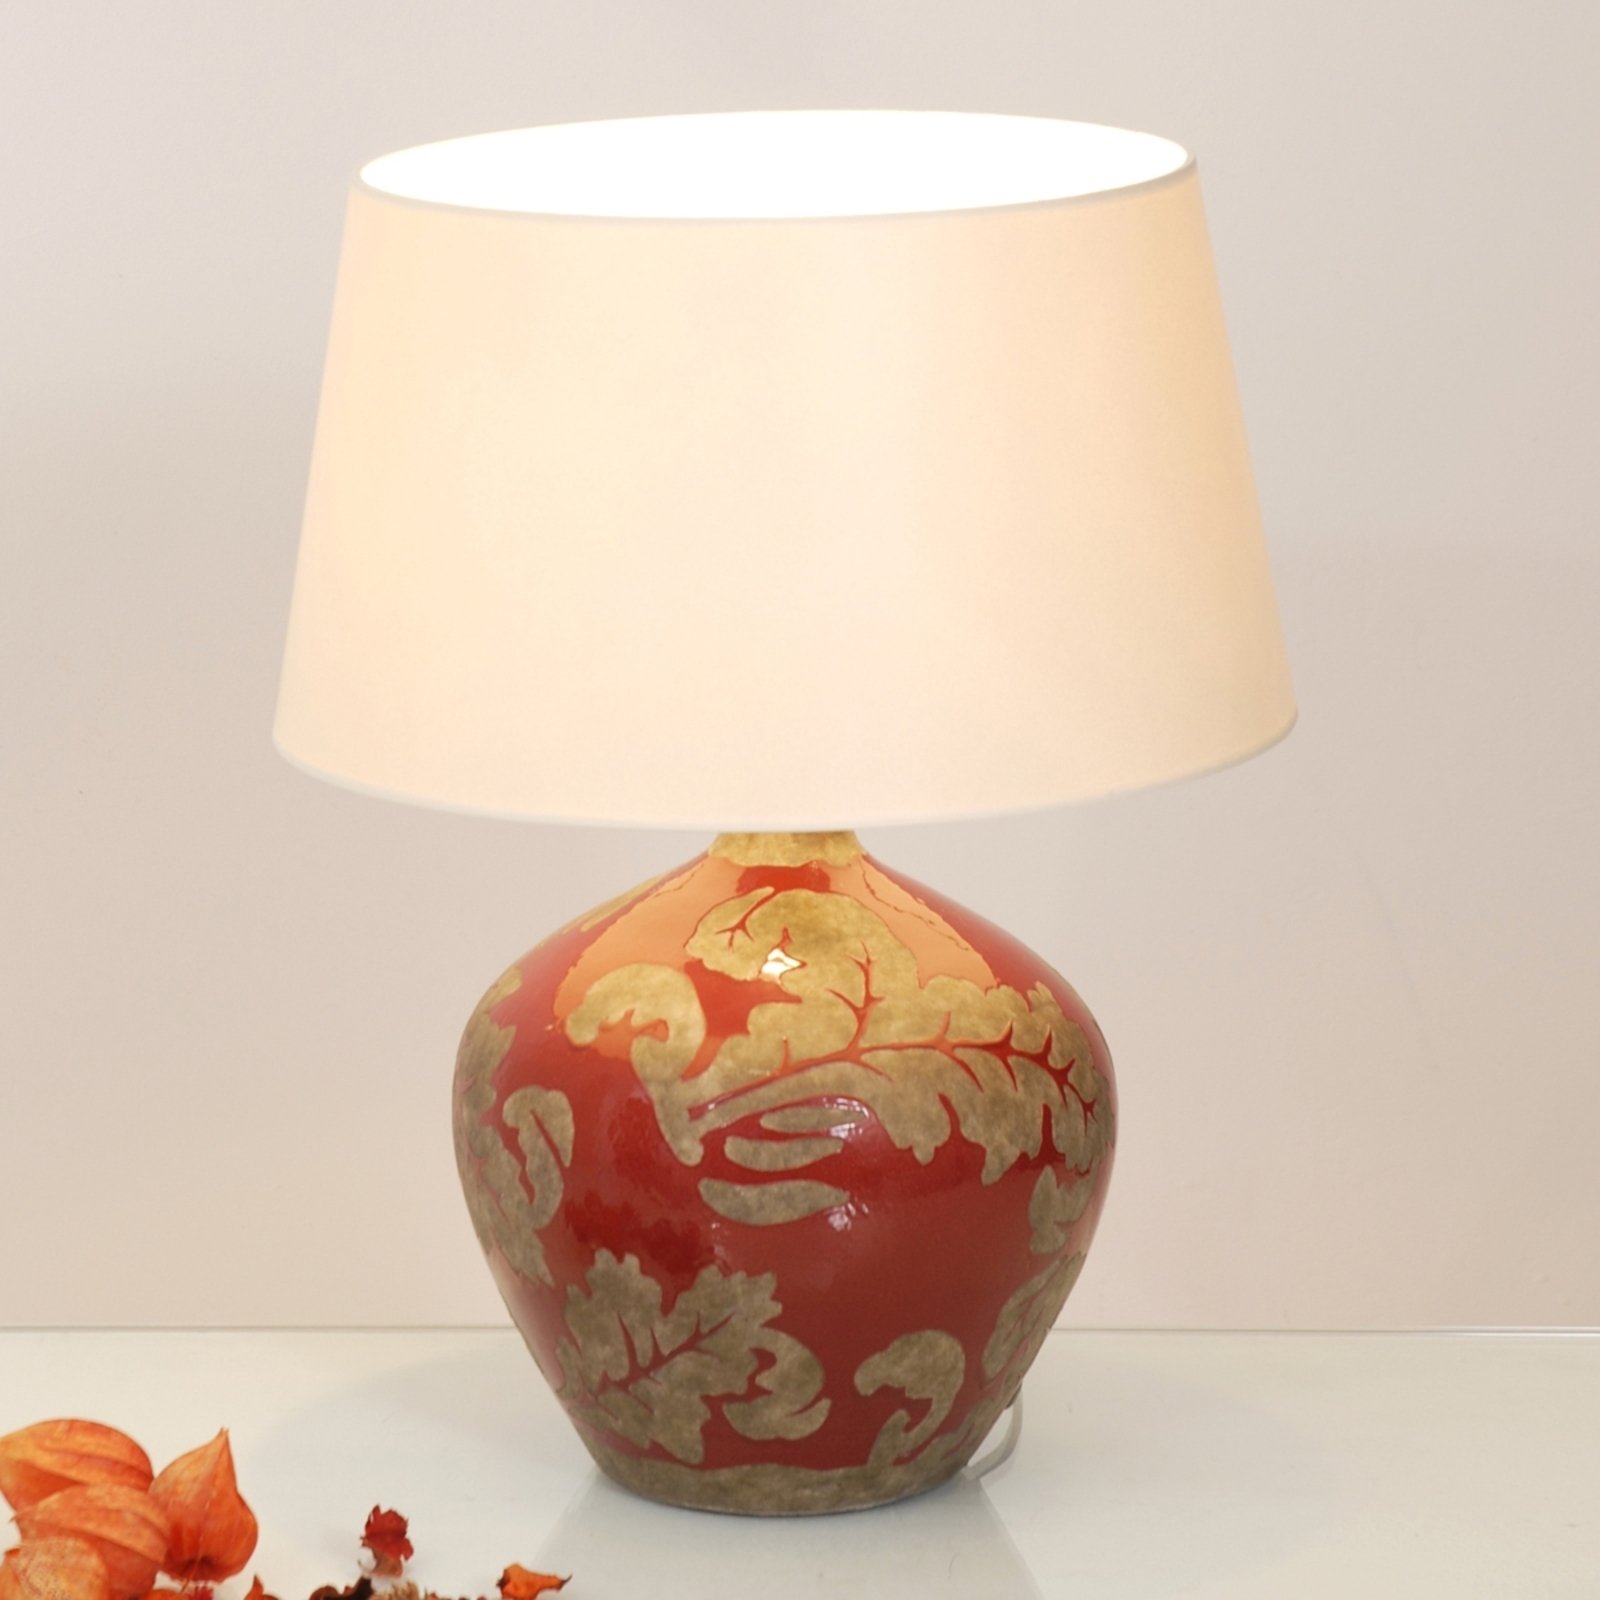 Toulouse round table lamp, 42 cm high, red